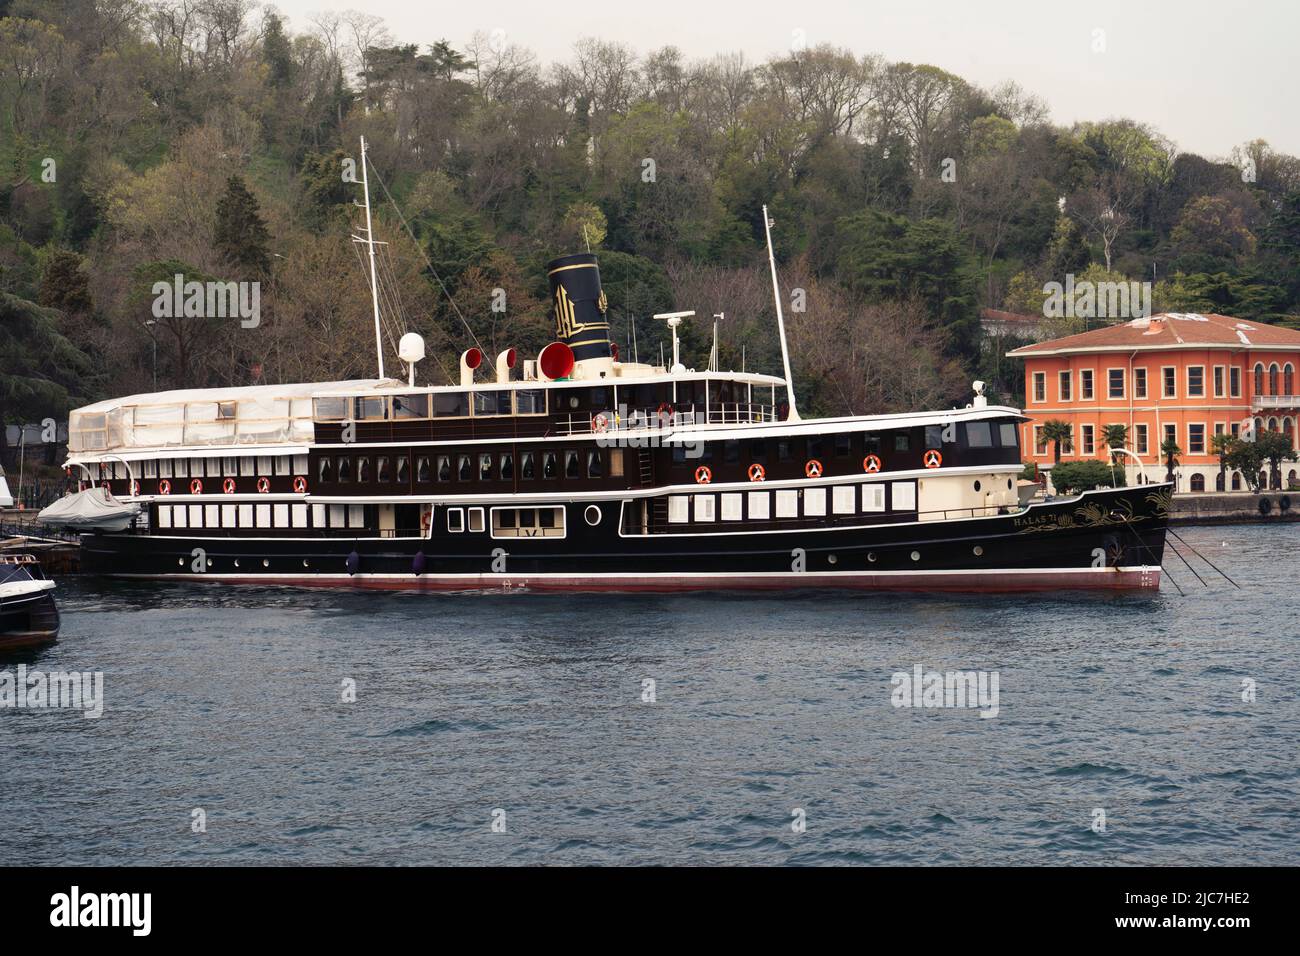 .Historical ship Halas 71 in the Bosphorus anchored ashore. The steamer is available for celebrations and parties. Stock Photo